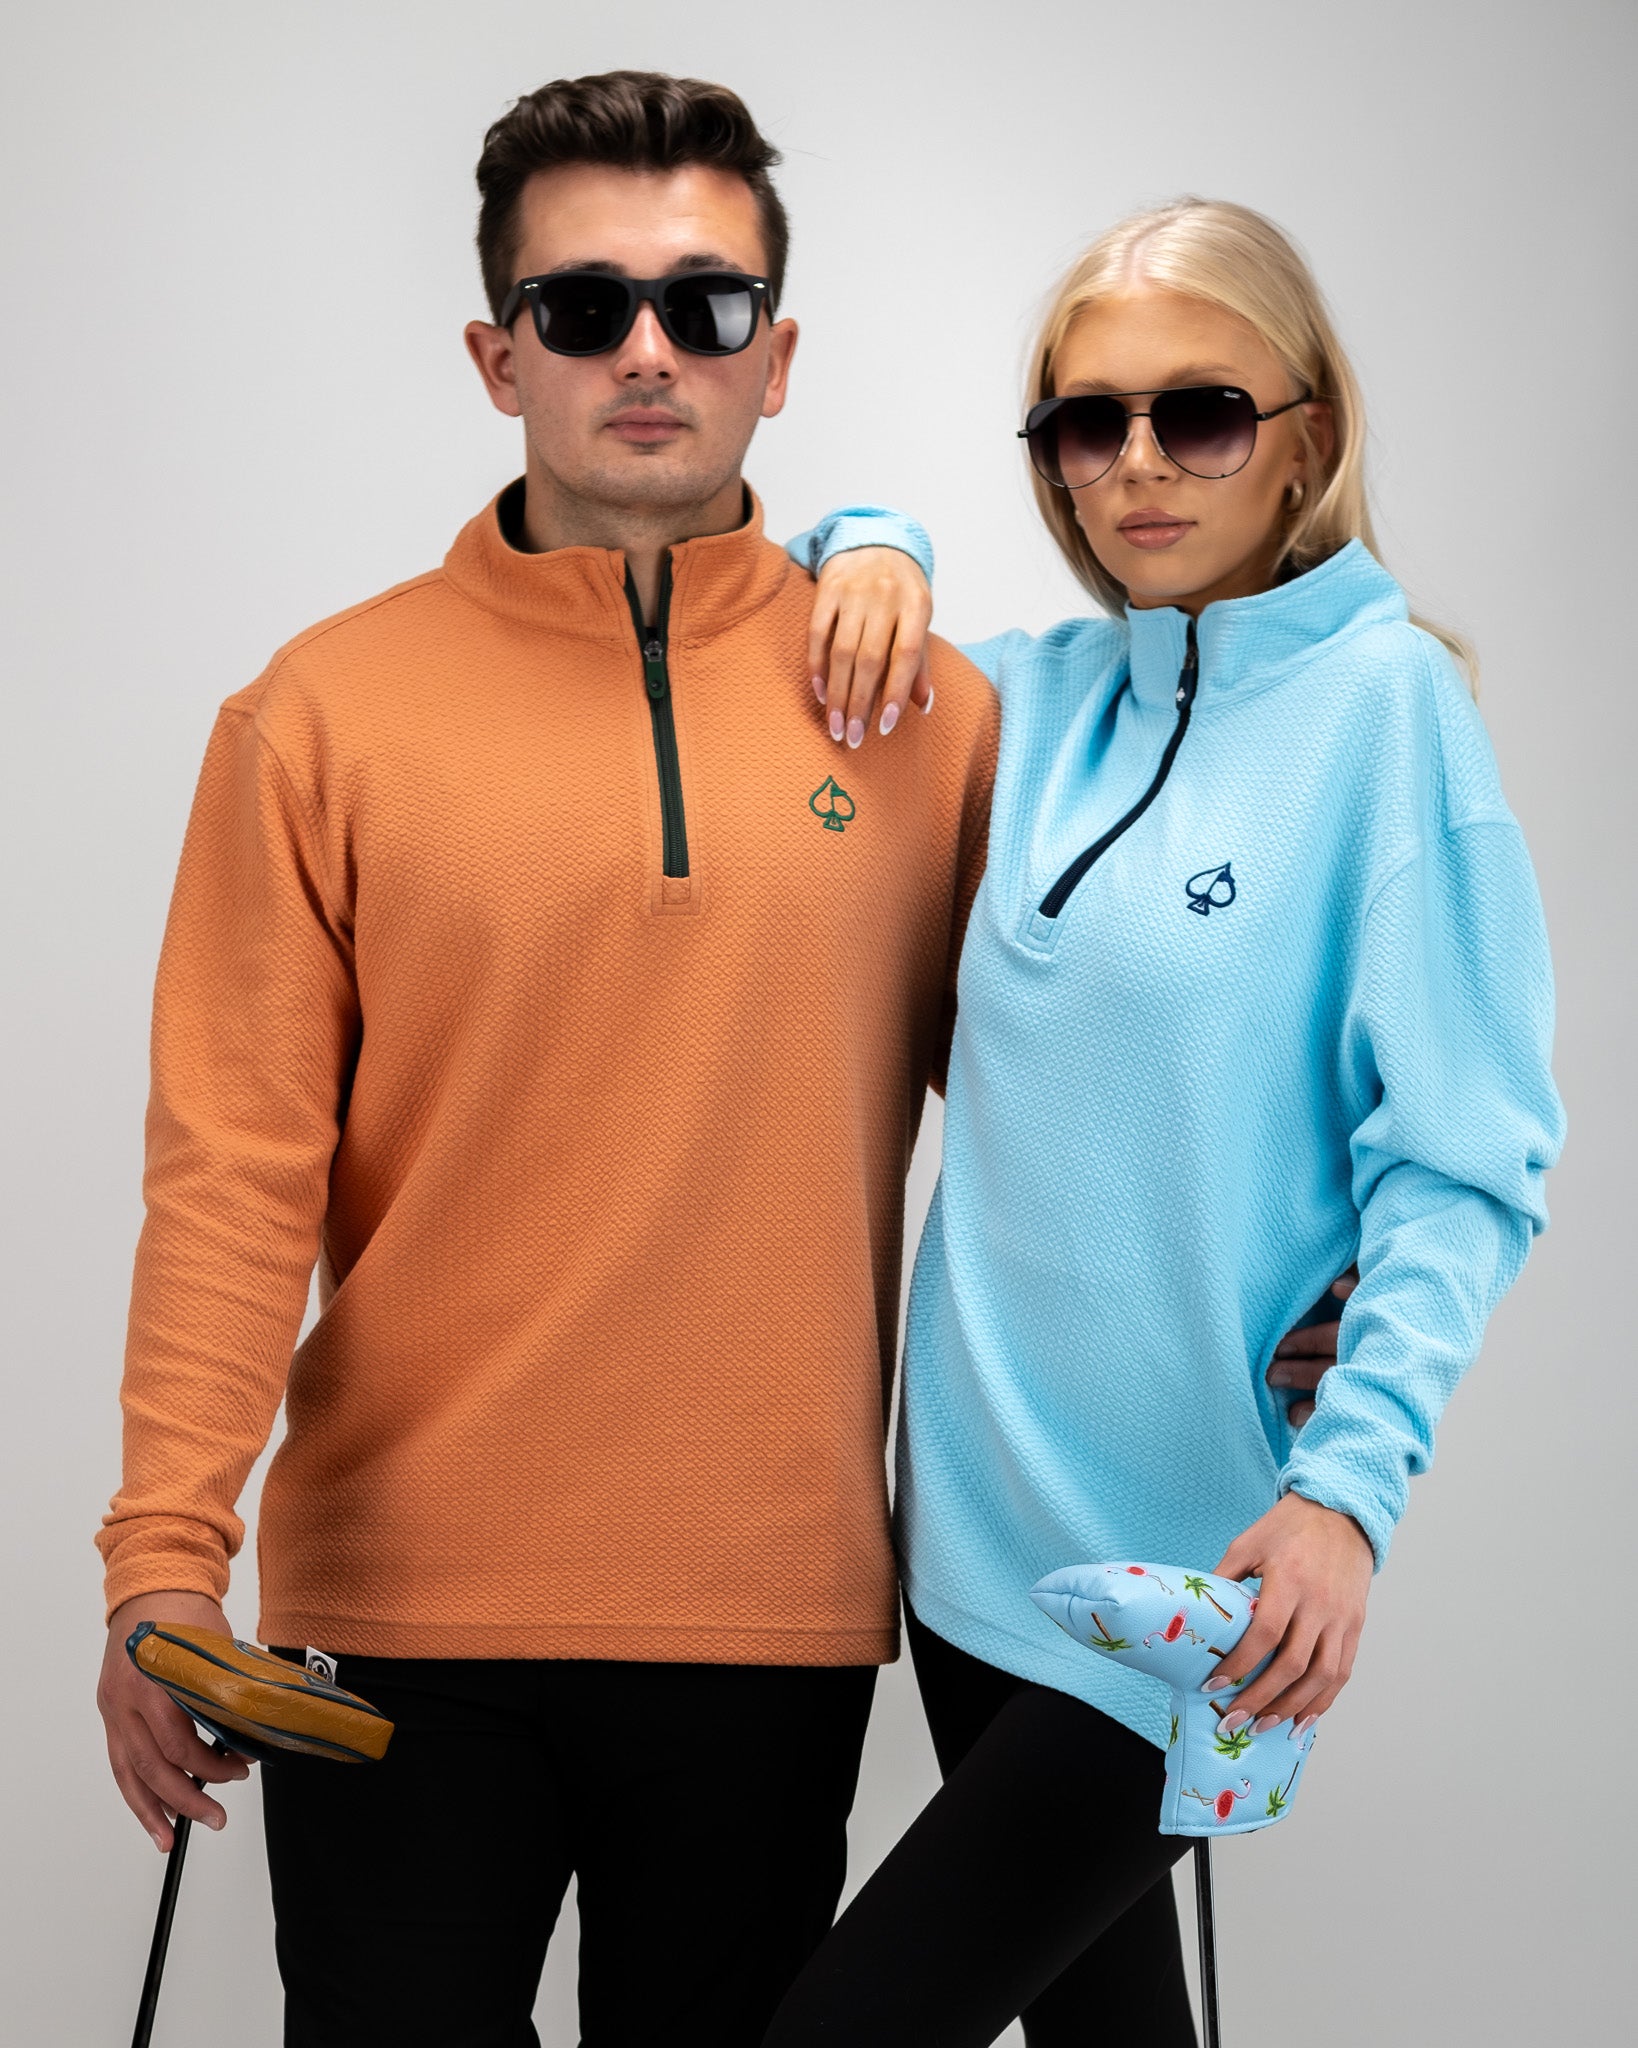 Player Preferred™ Waffle Knit Pullover - Pumpkin